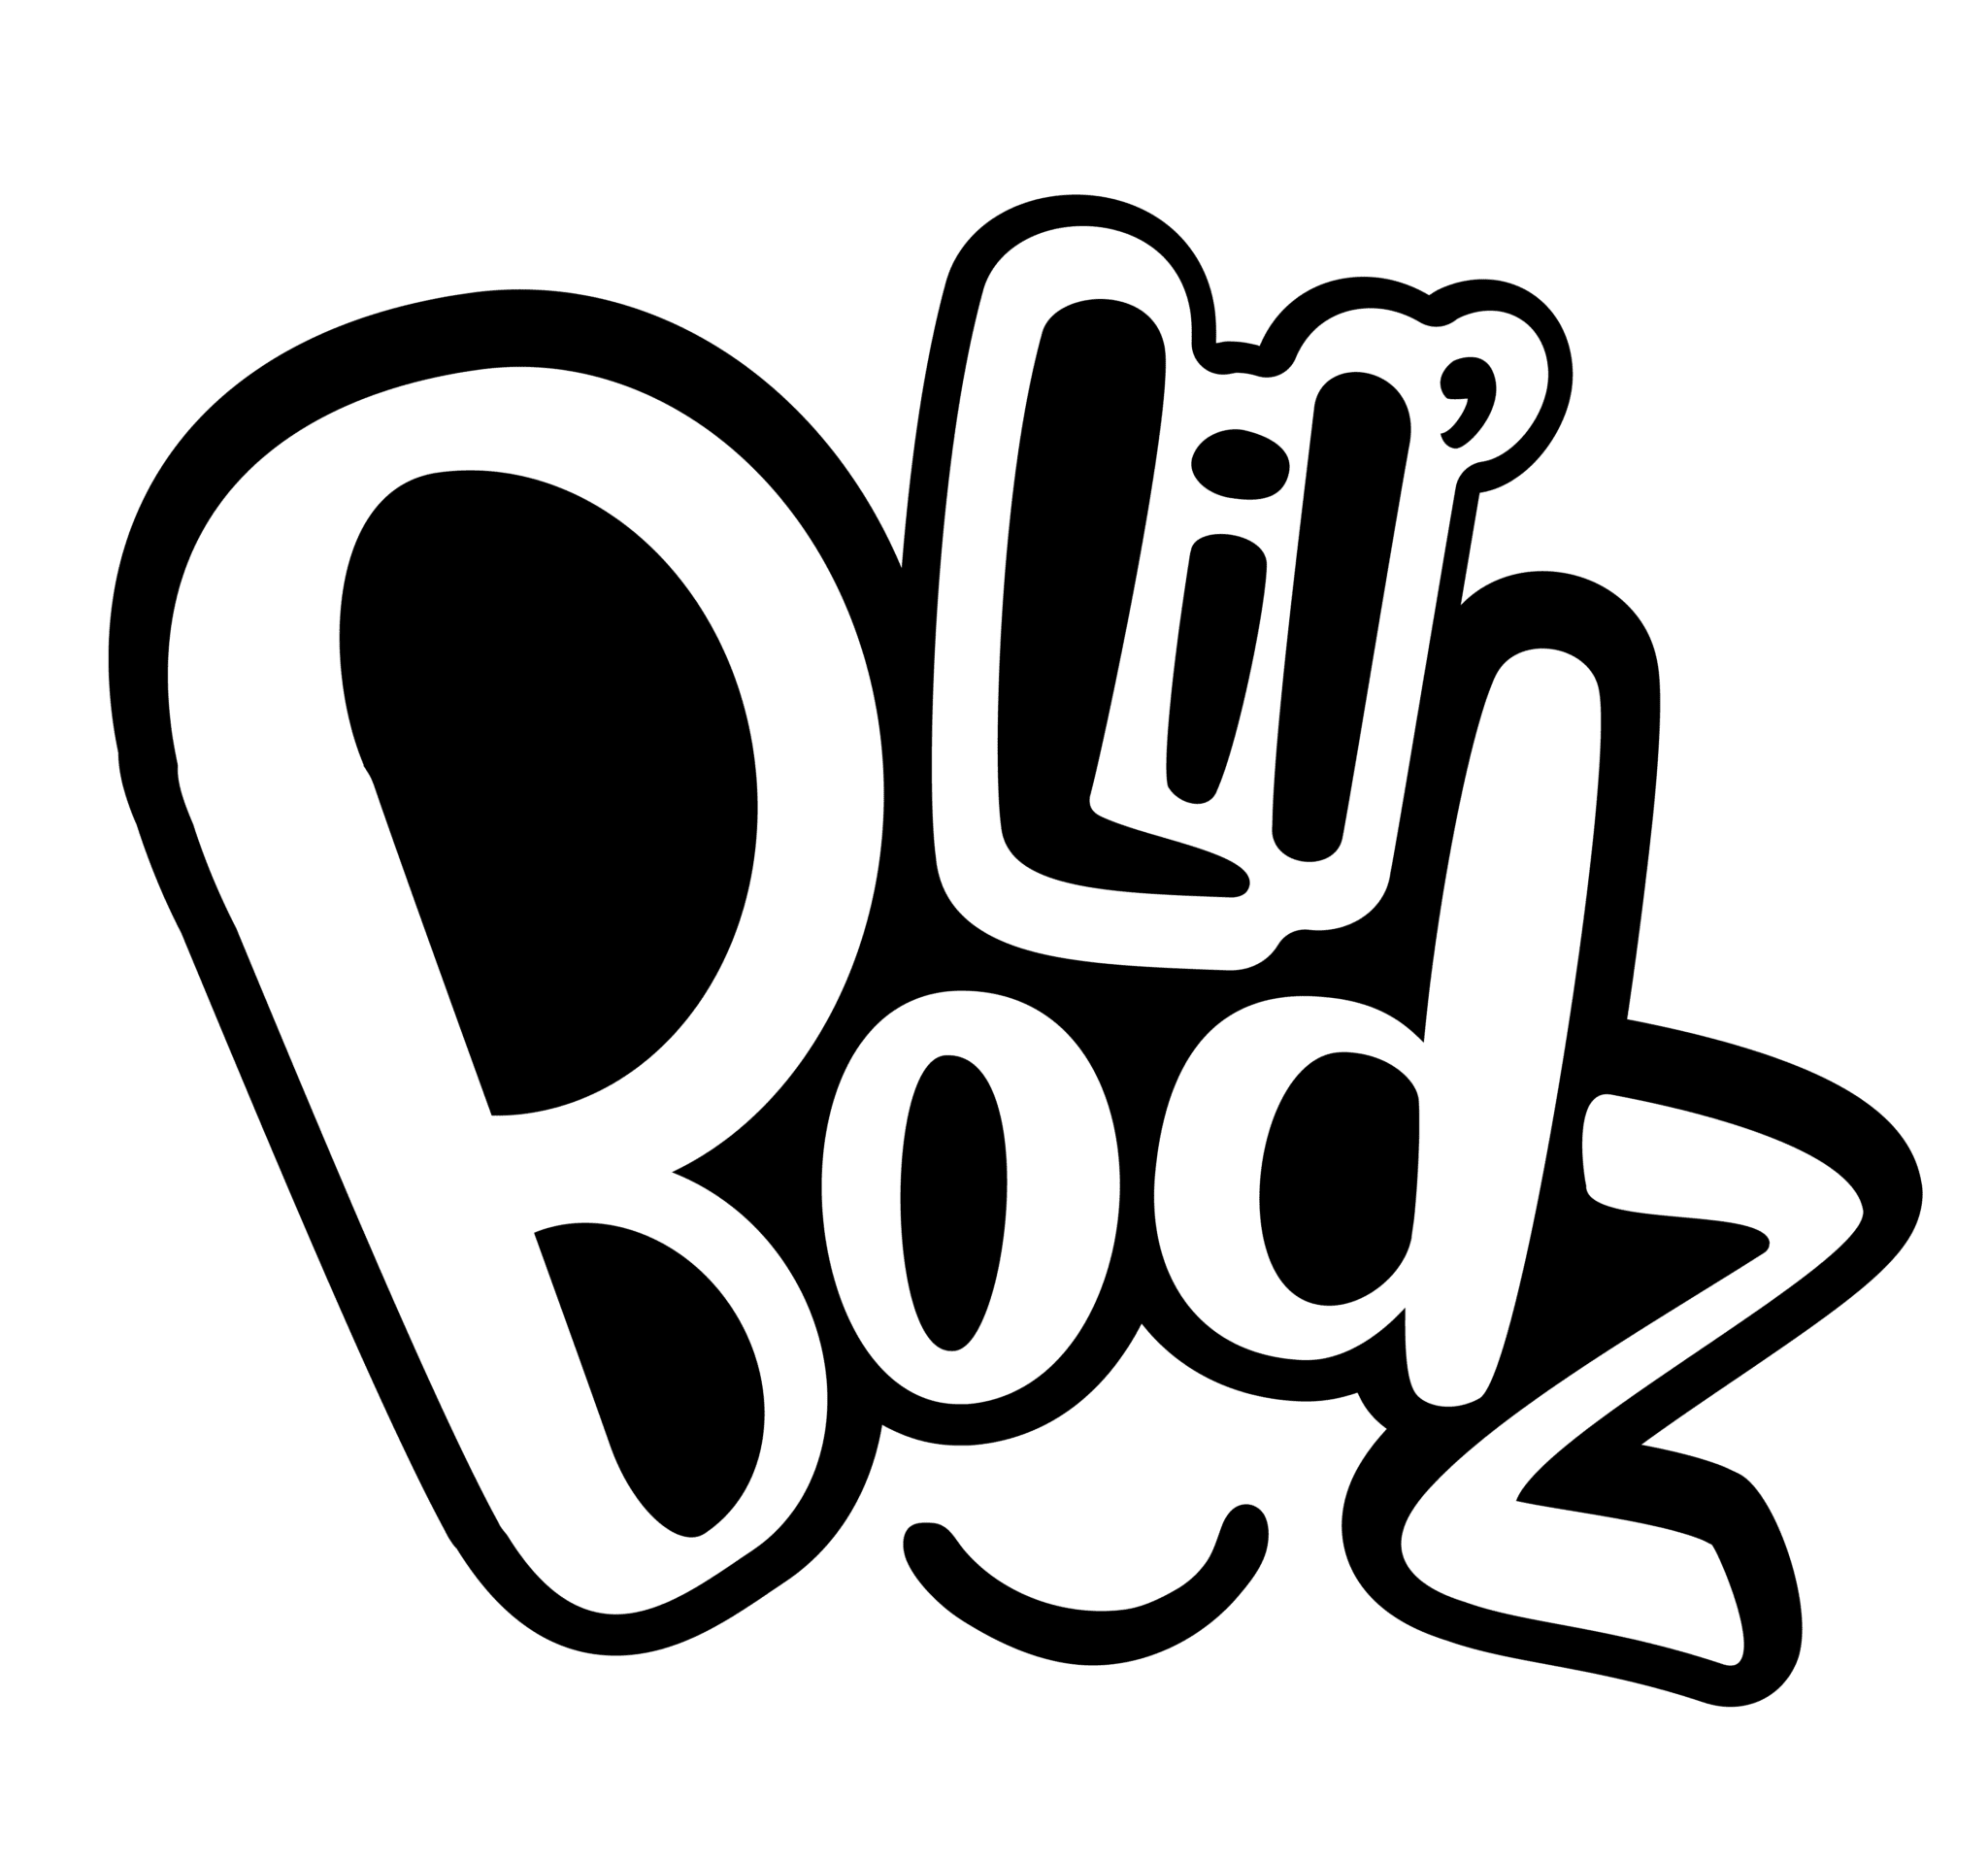 This is an image of the Lil Bodz logo.